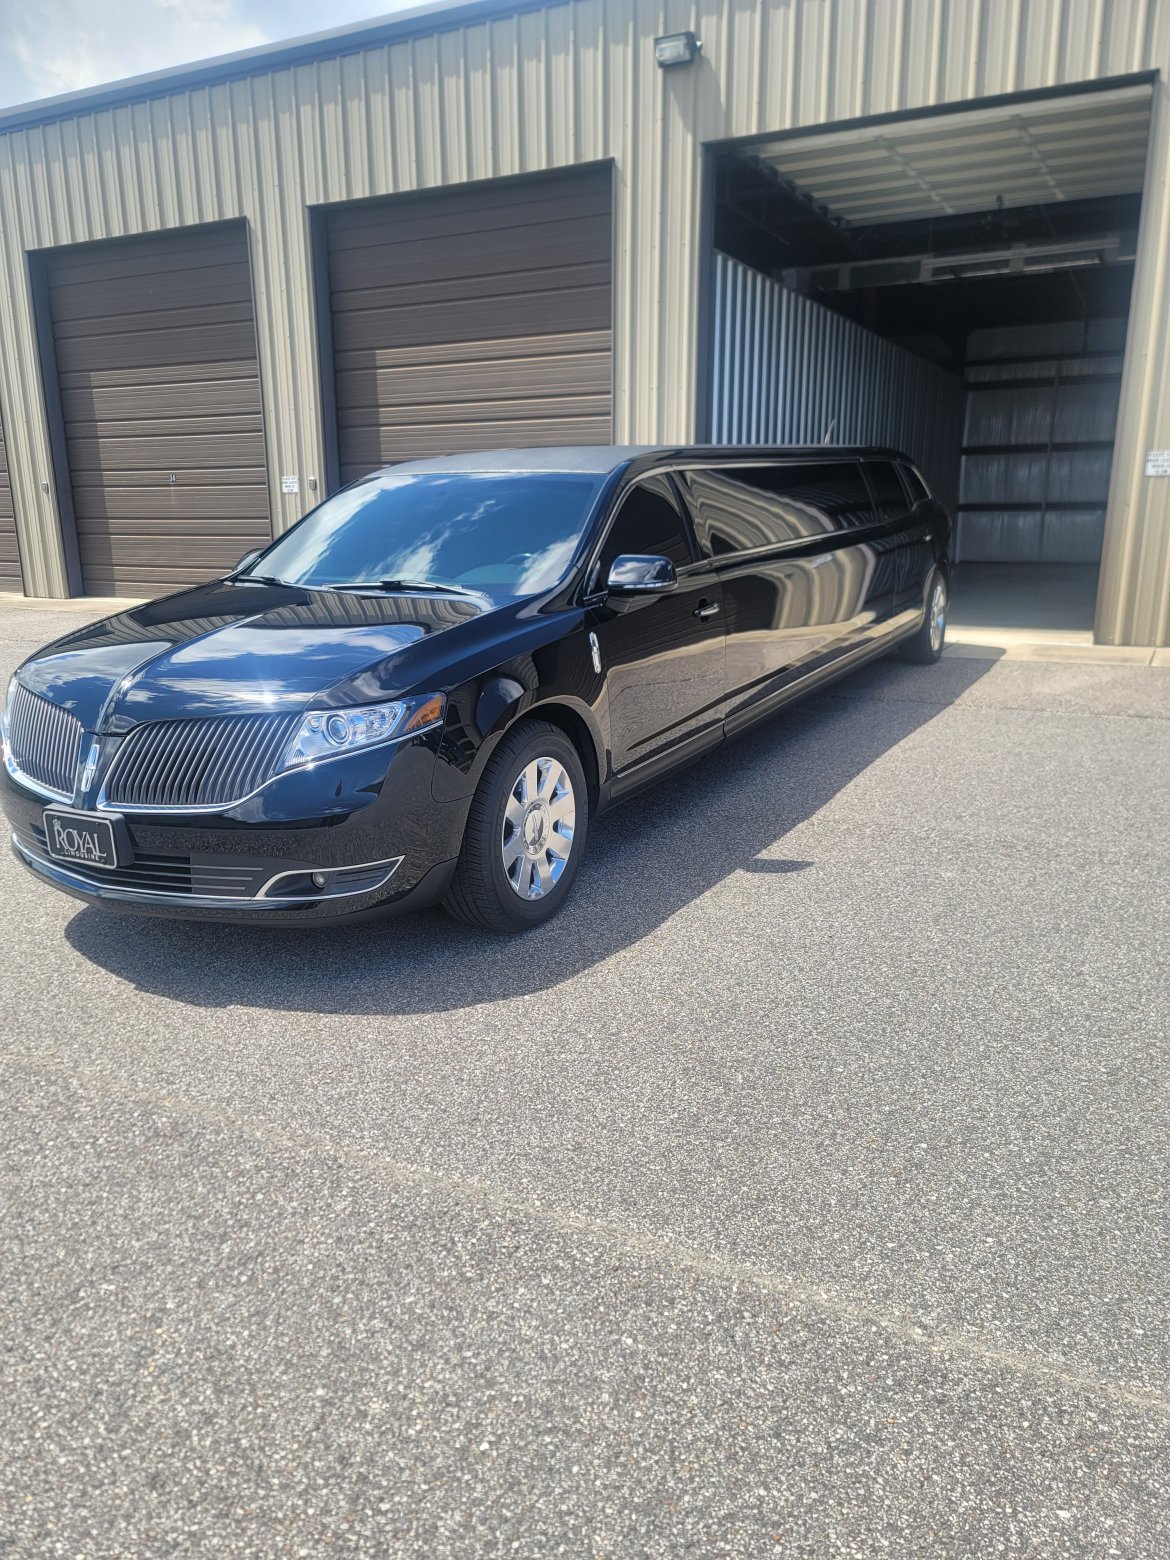 Limousine for sale: 2014 Lincoln MKT 120&quot; by Royal Coach Builders